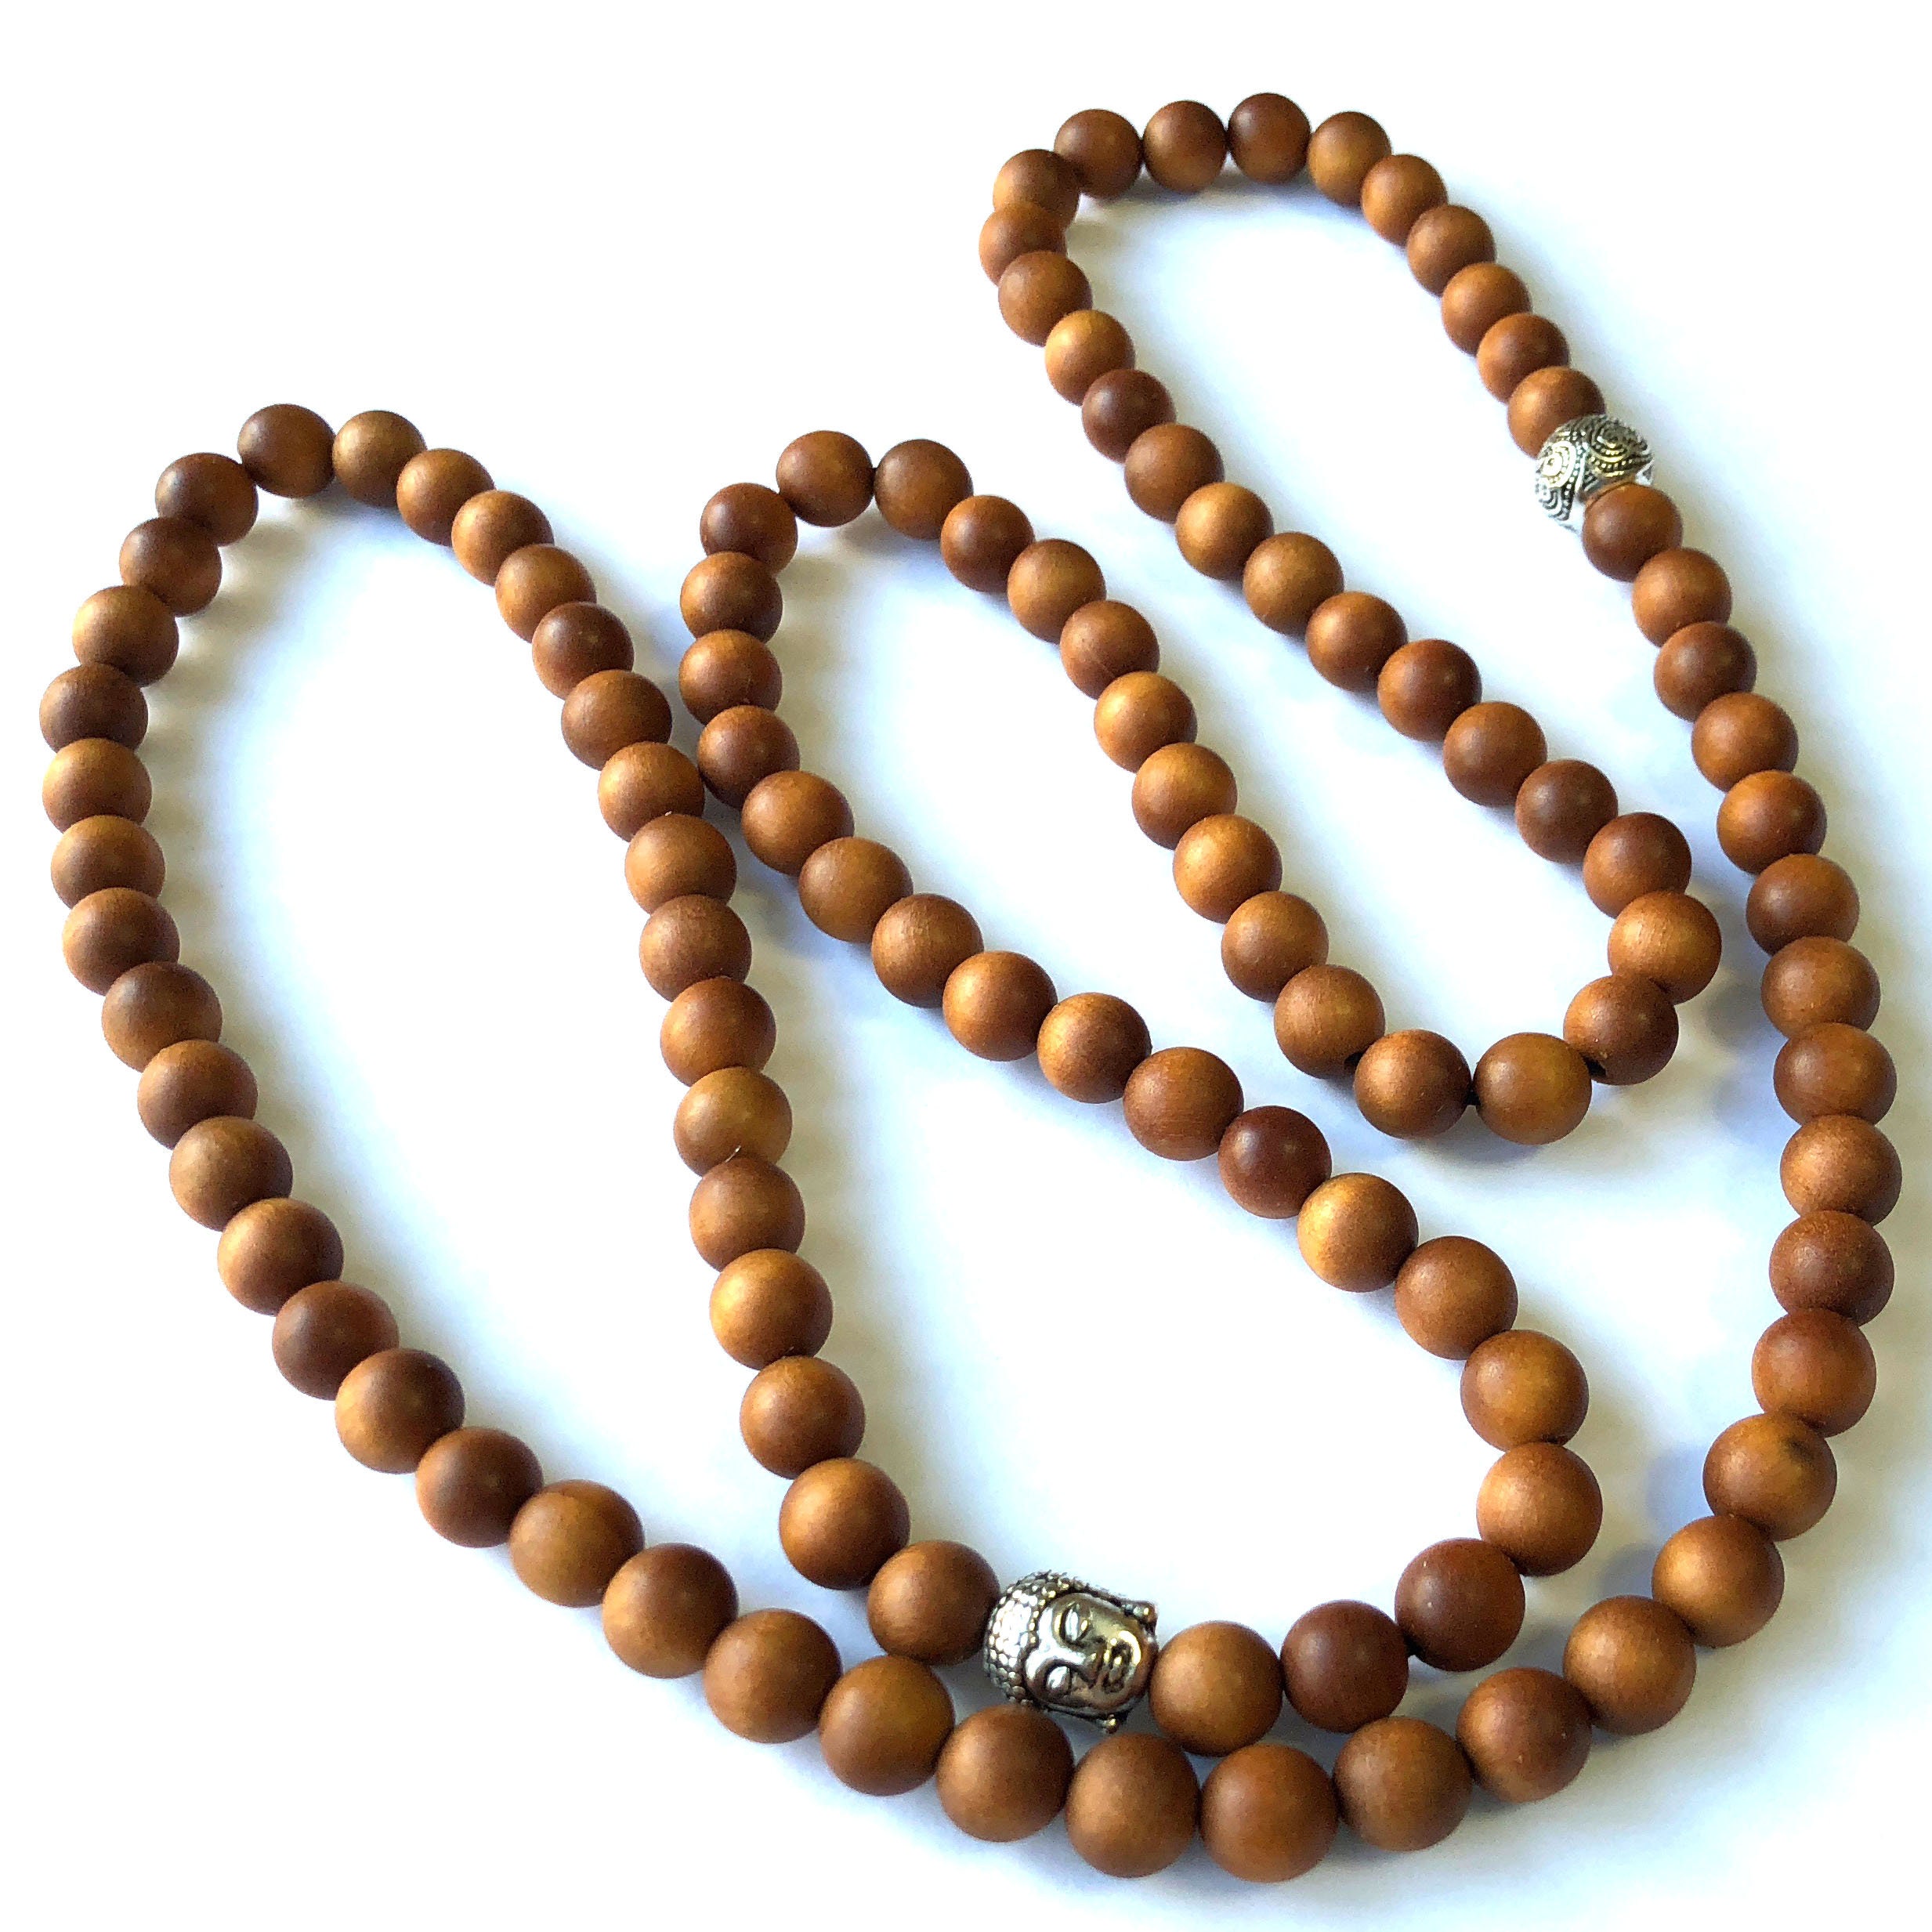 Prometis 200pcs 8mm Natural Sandalwood Round Beads Gorgeous Craft Handmade Polished Spacer Mala Pray Beads with Elastic Cord for Bracelets DIY